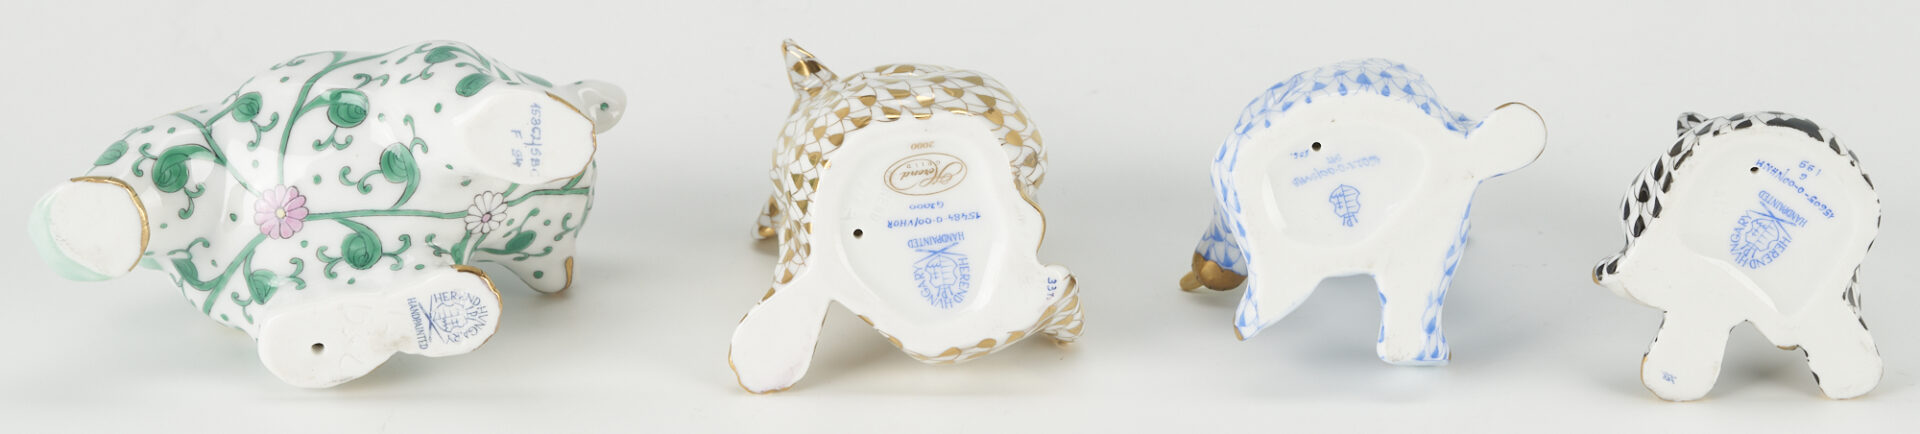 Lot 225: 9 Herend Porcelain Bear Figurines, incl. Siang Blanc pattern